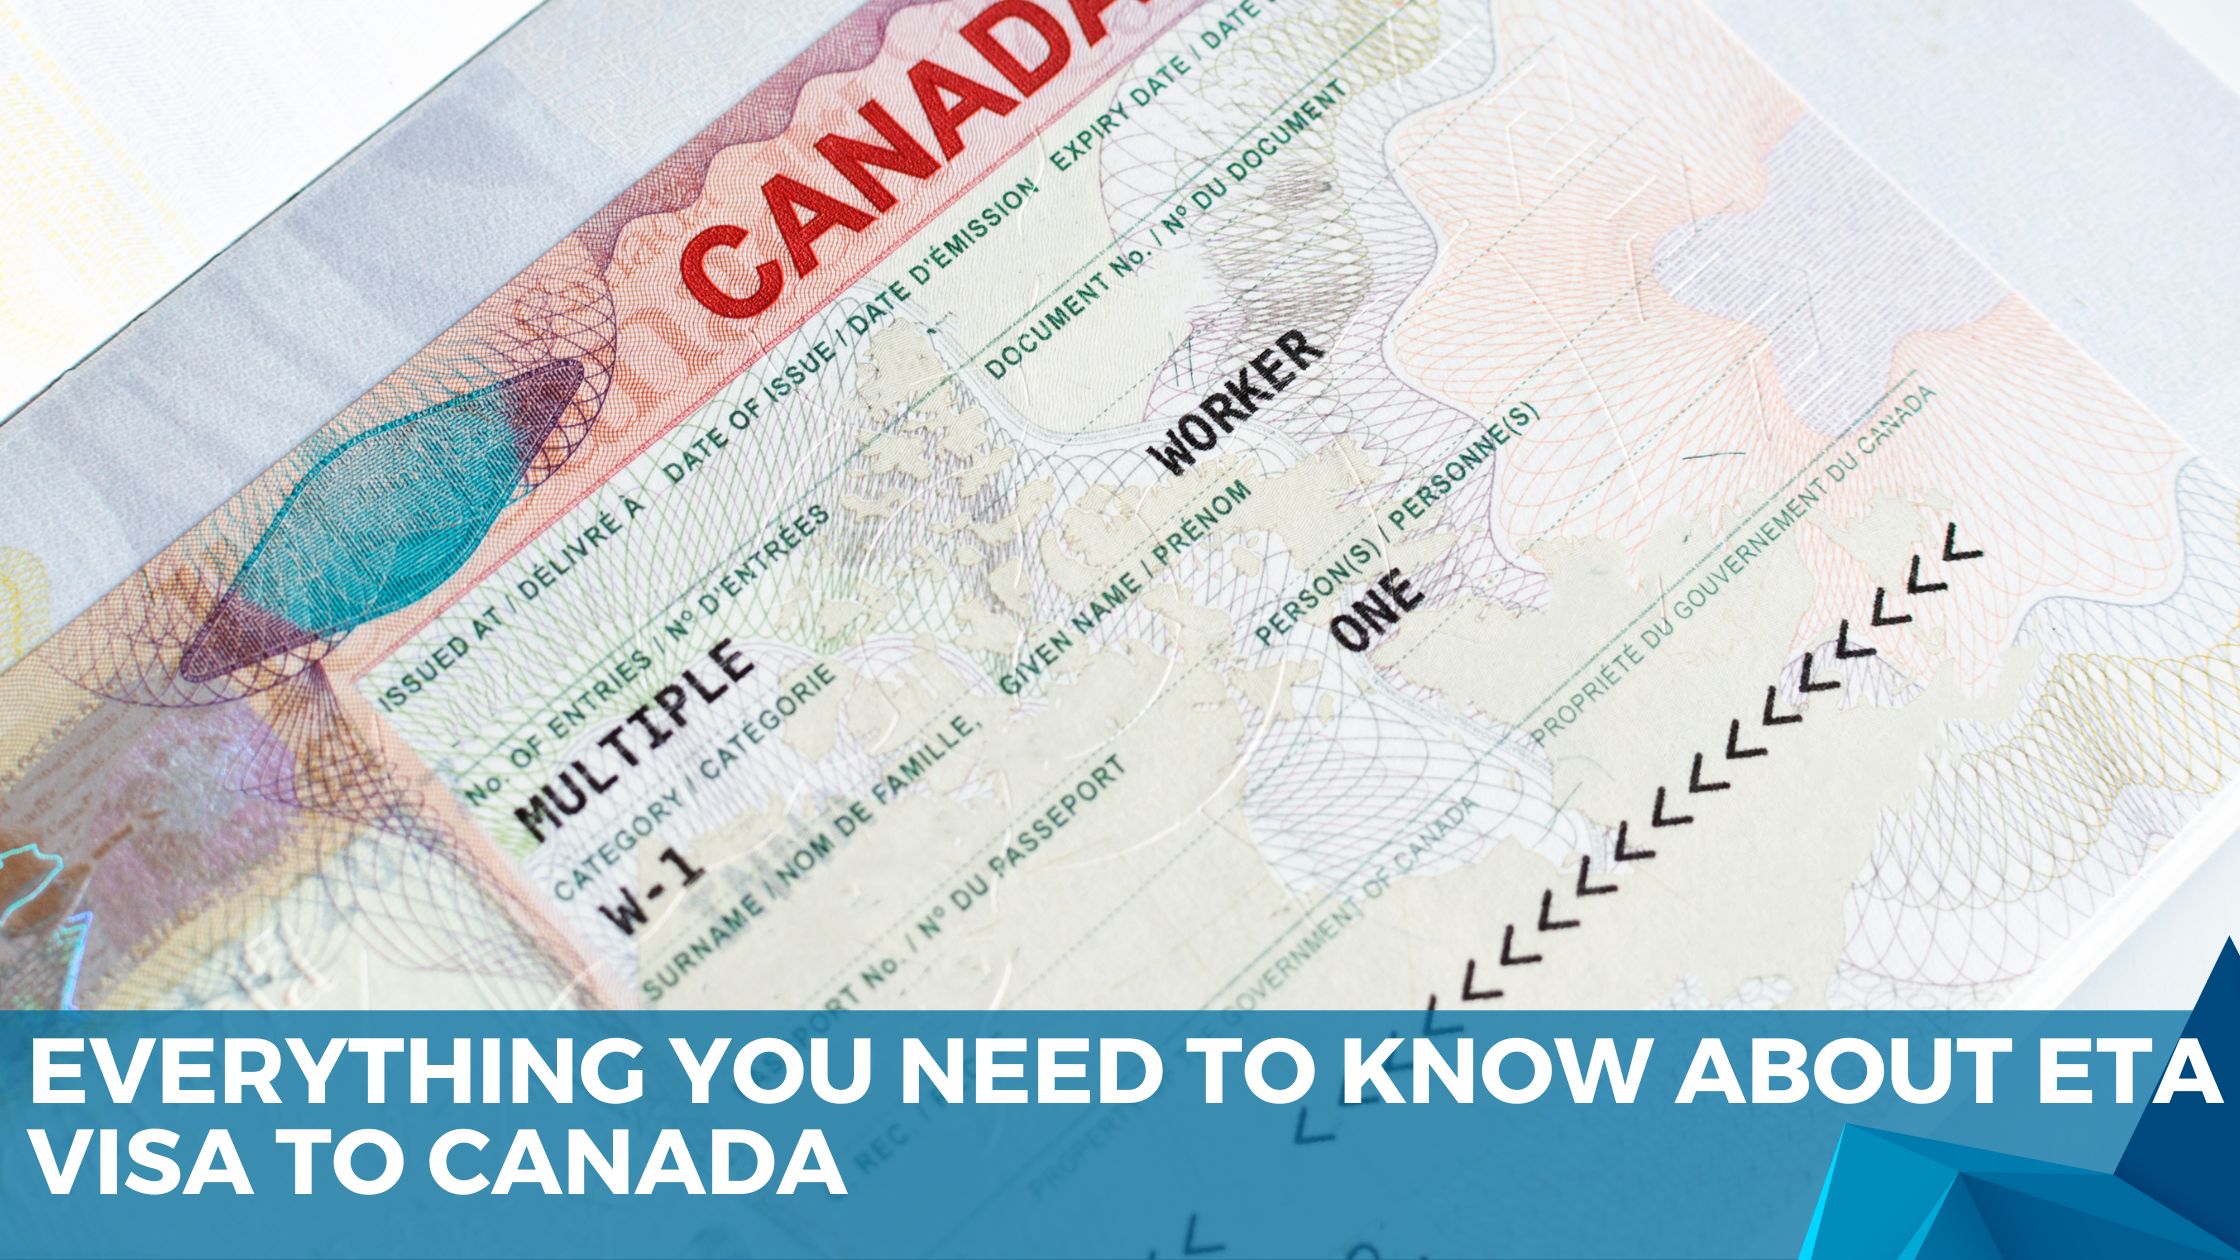 Everything you need to know about ETA visa to Canada